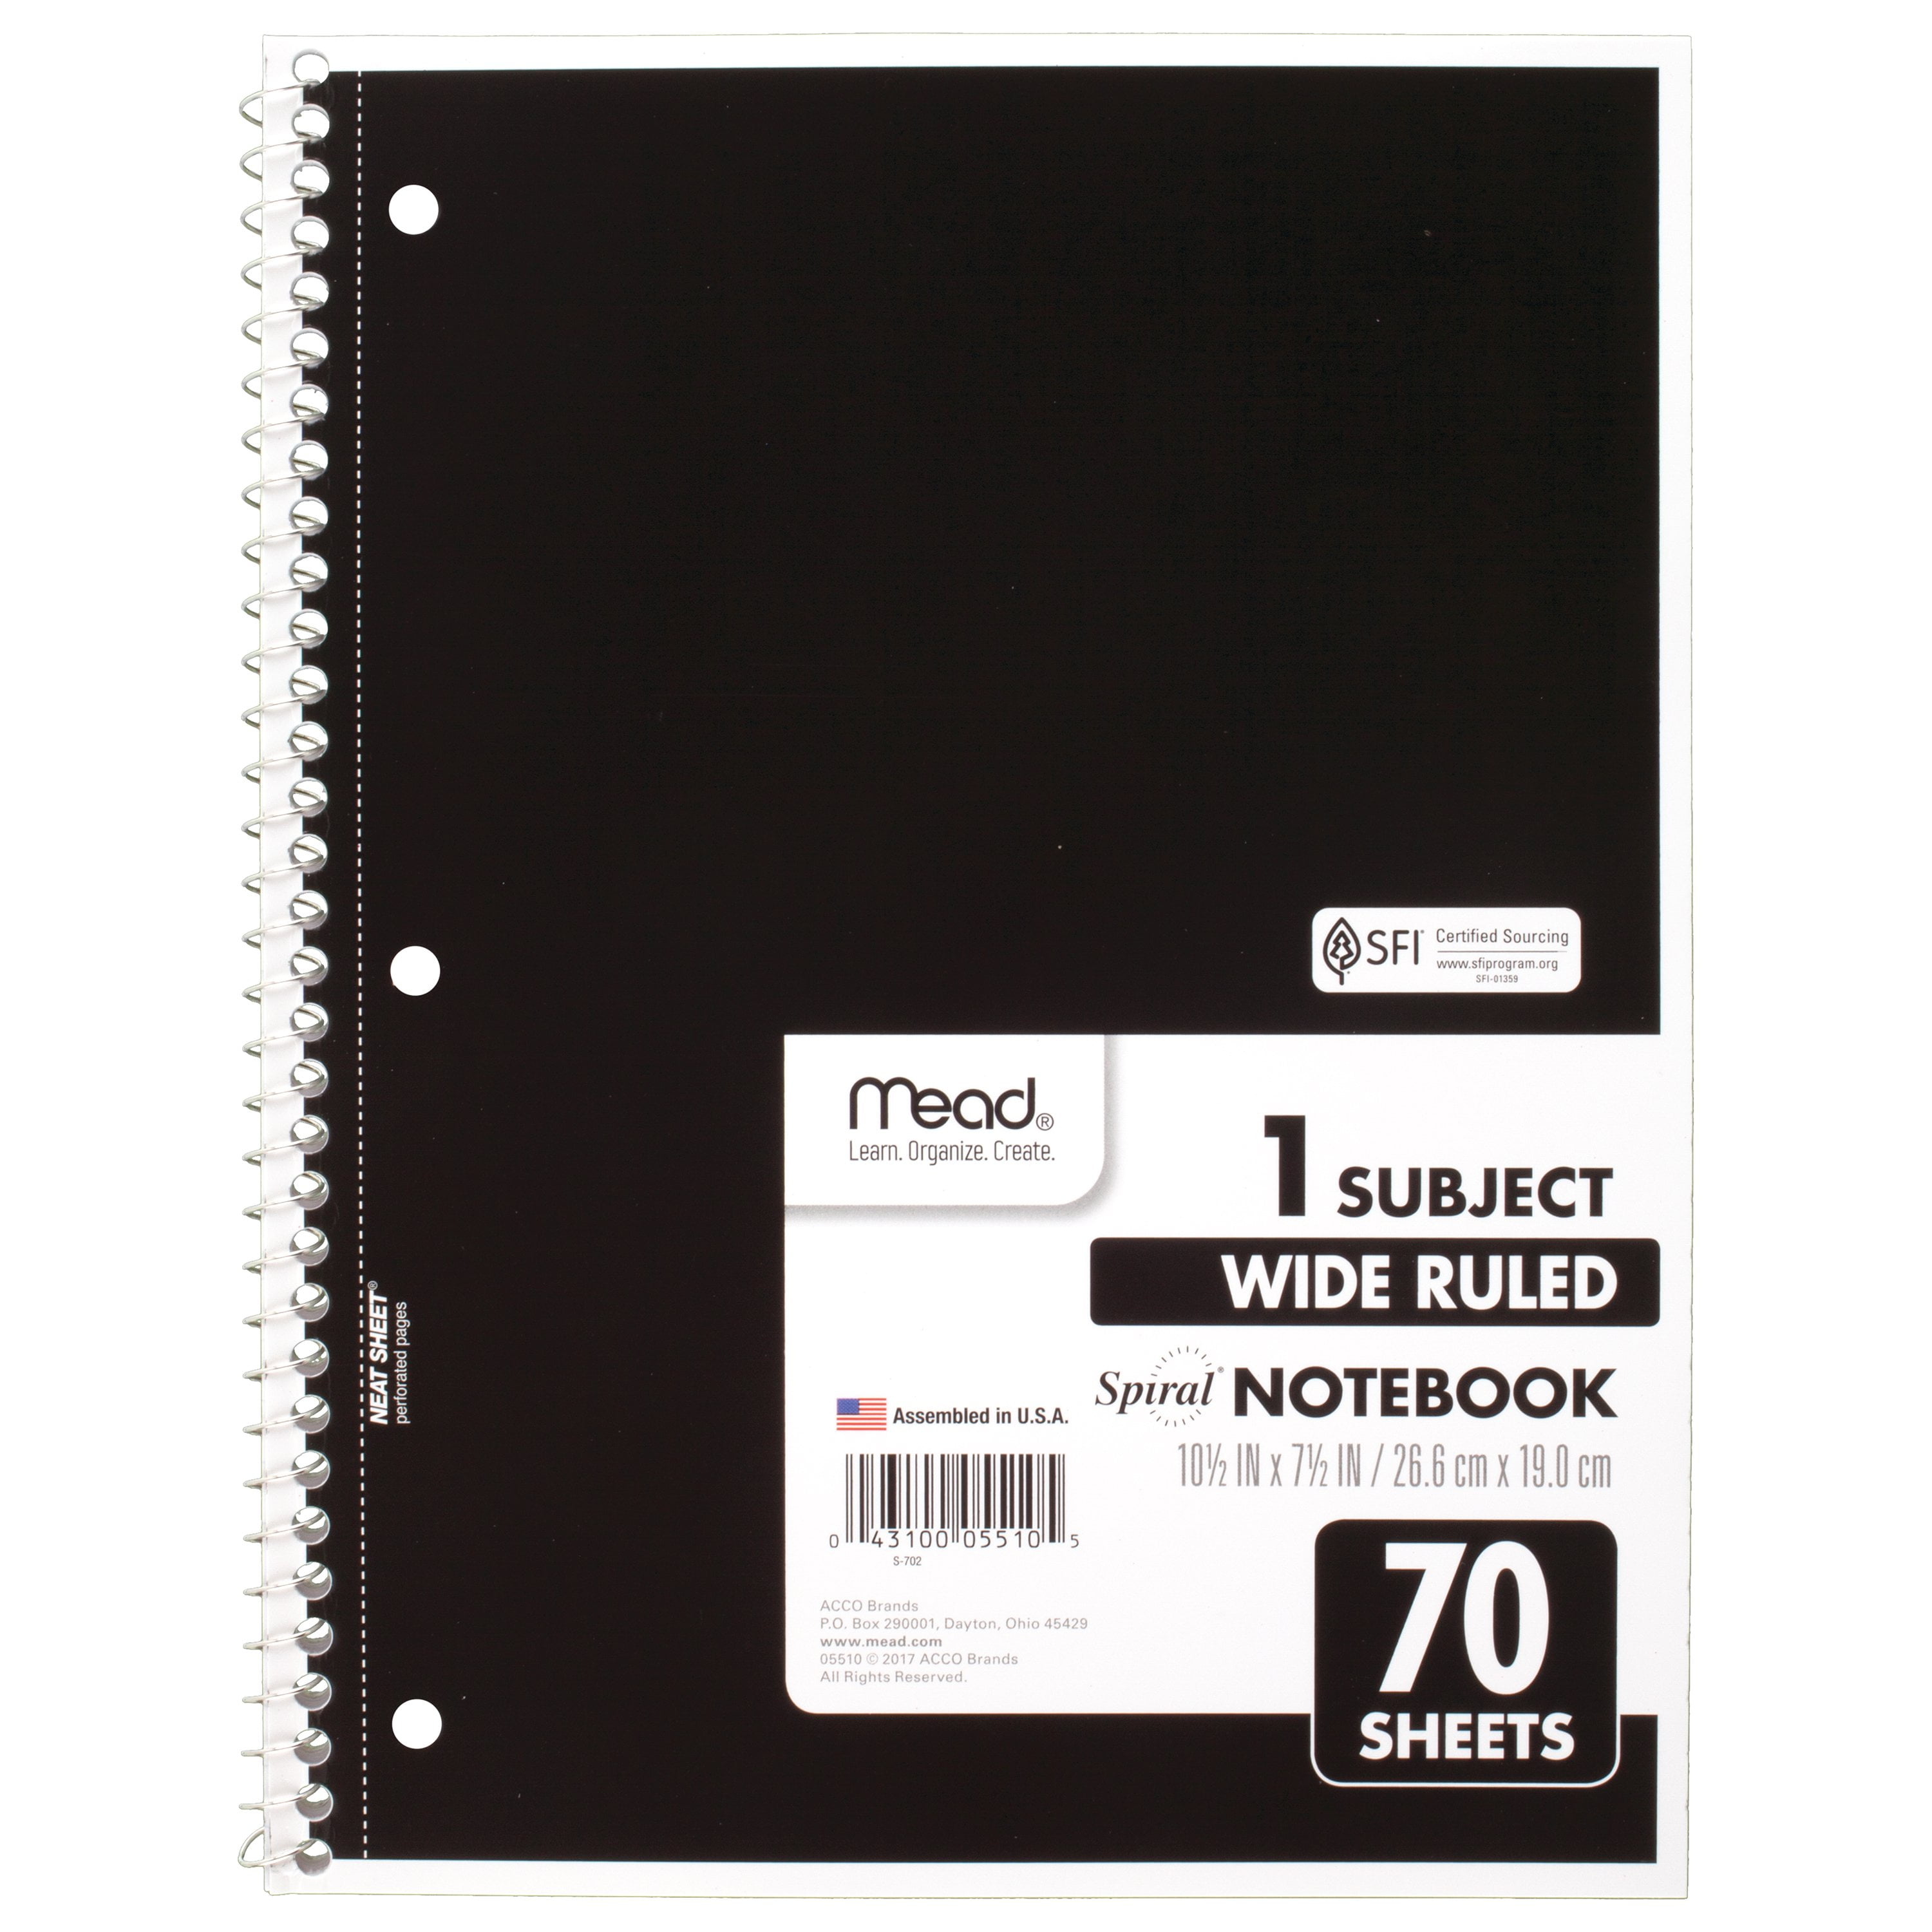 4 Spiral Notebook WIDE Ruled One Subject 70 Sheets Each RM-1 